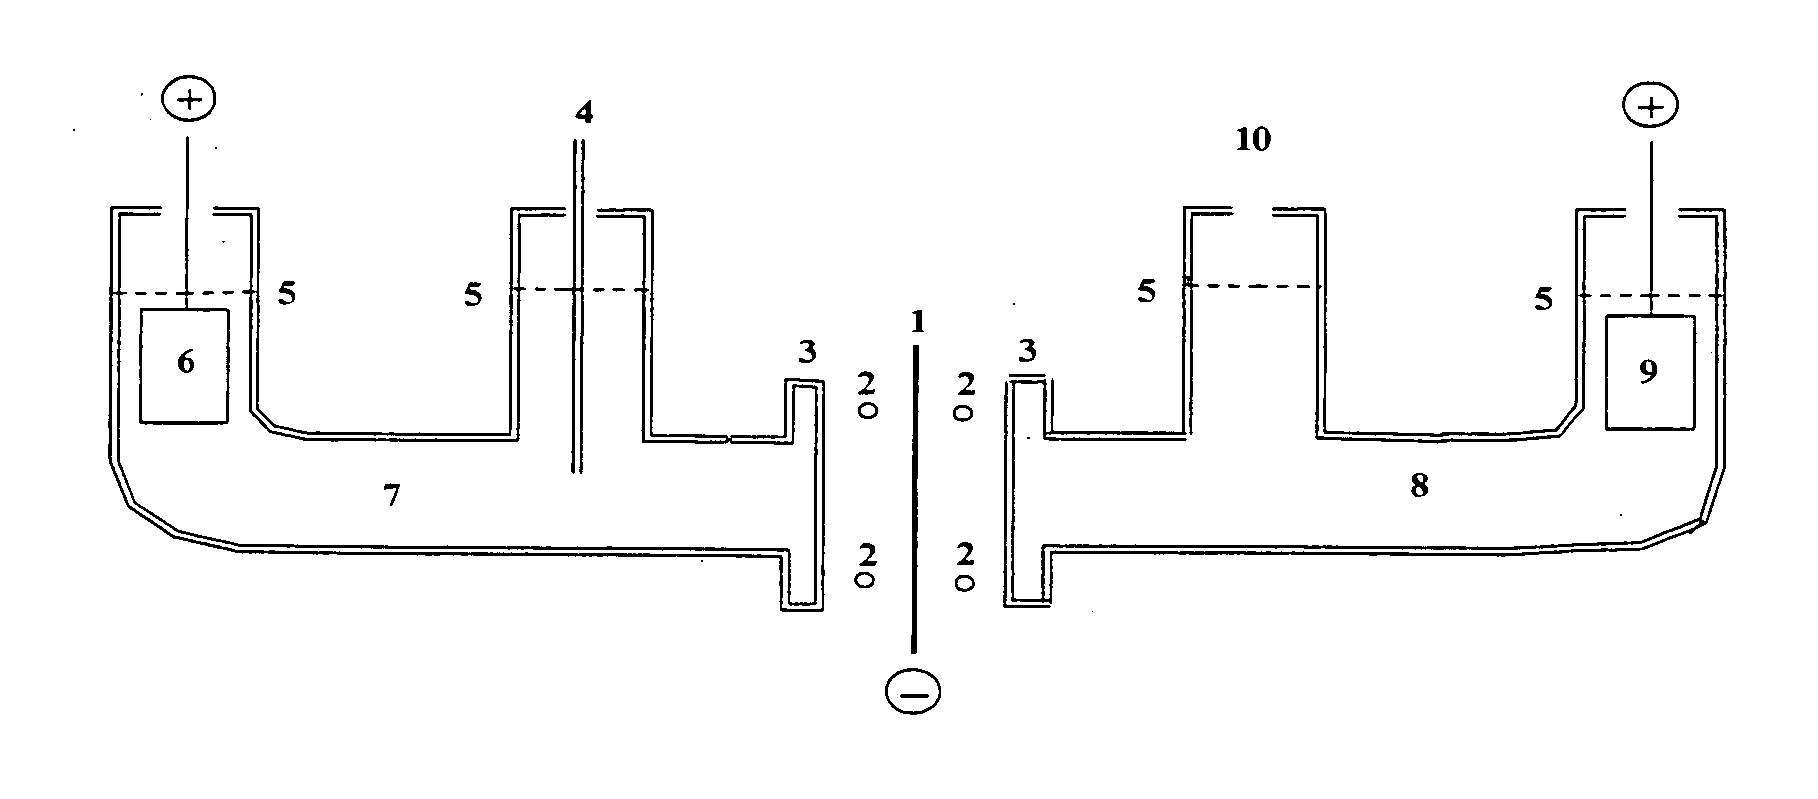 Chamber for reaction of lithium and deuterium